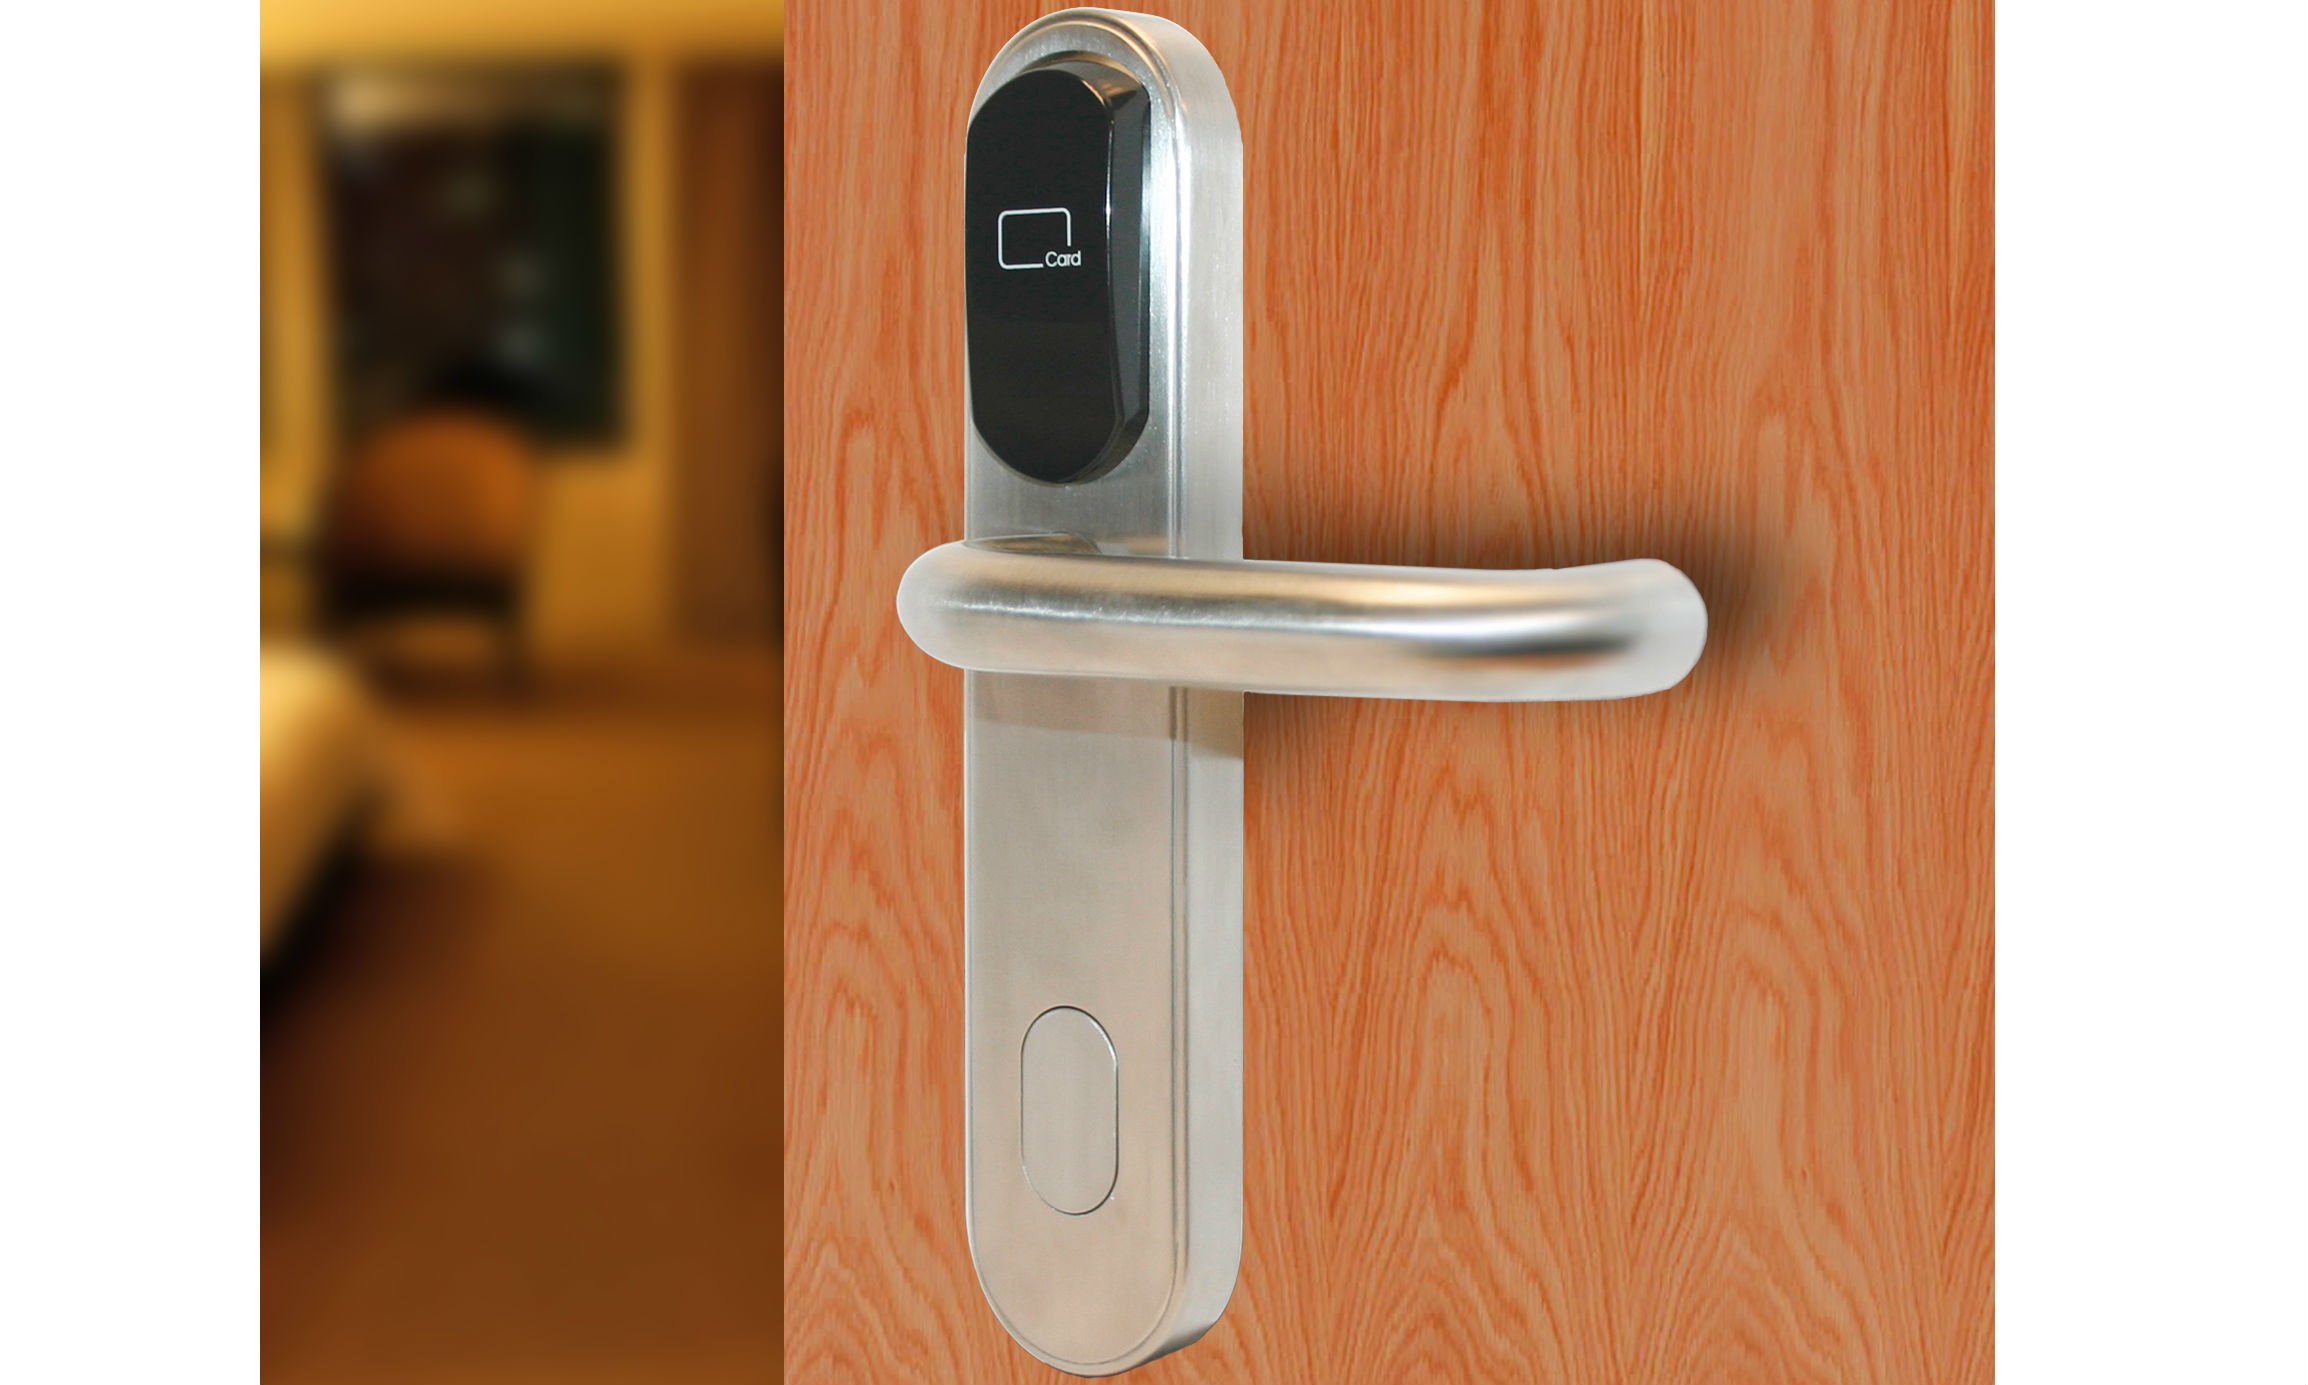 A Hole-In-One for the Securefast Smartlock system